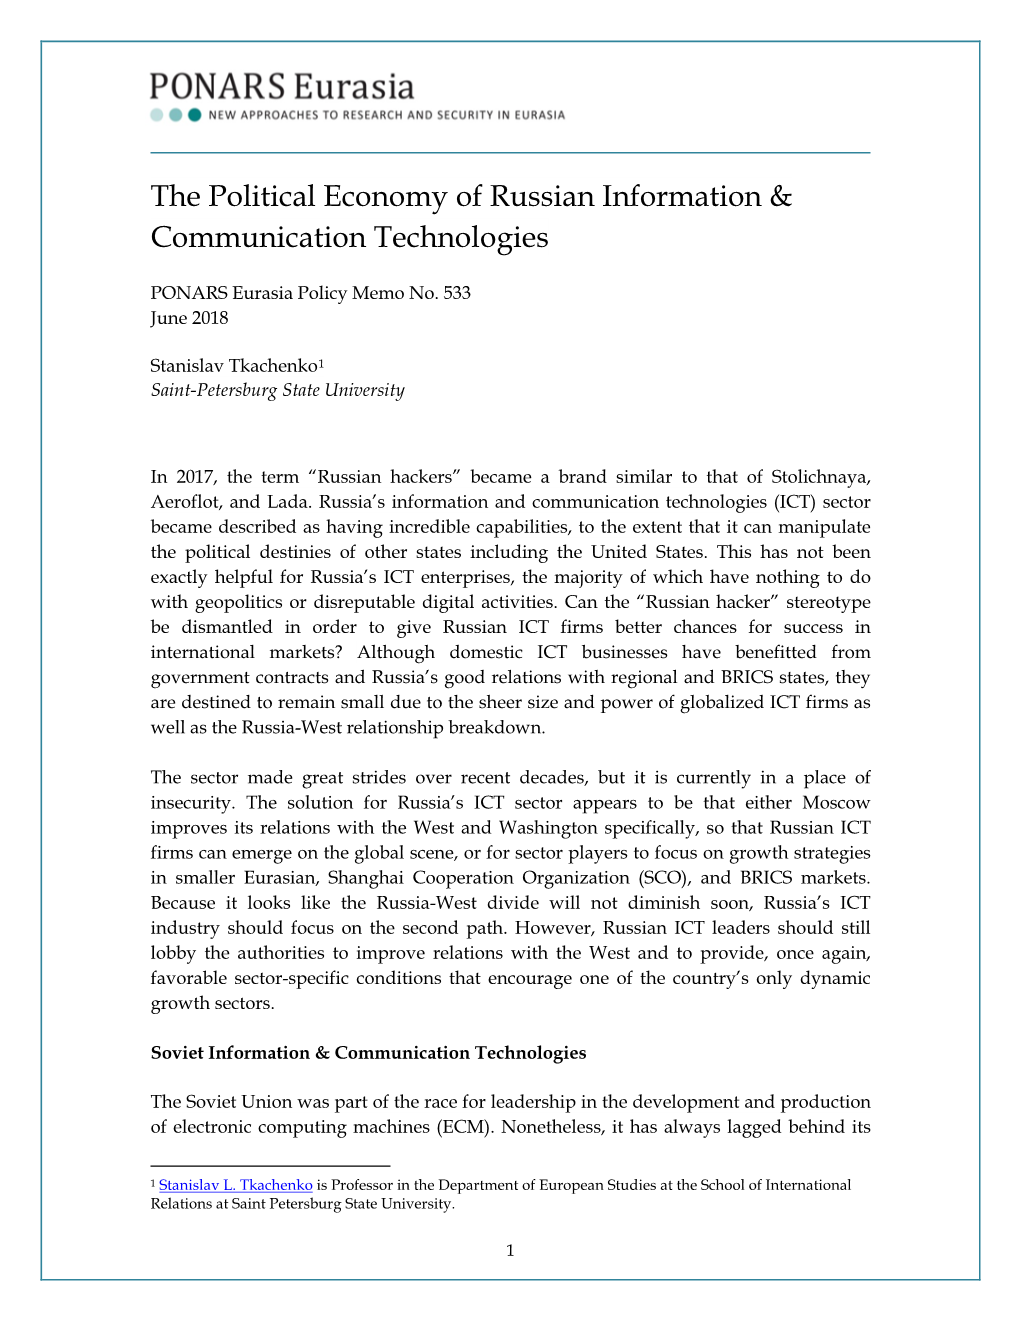 The Political Economy of Russian Information & Communication